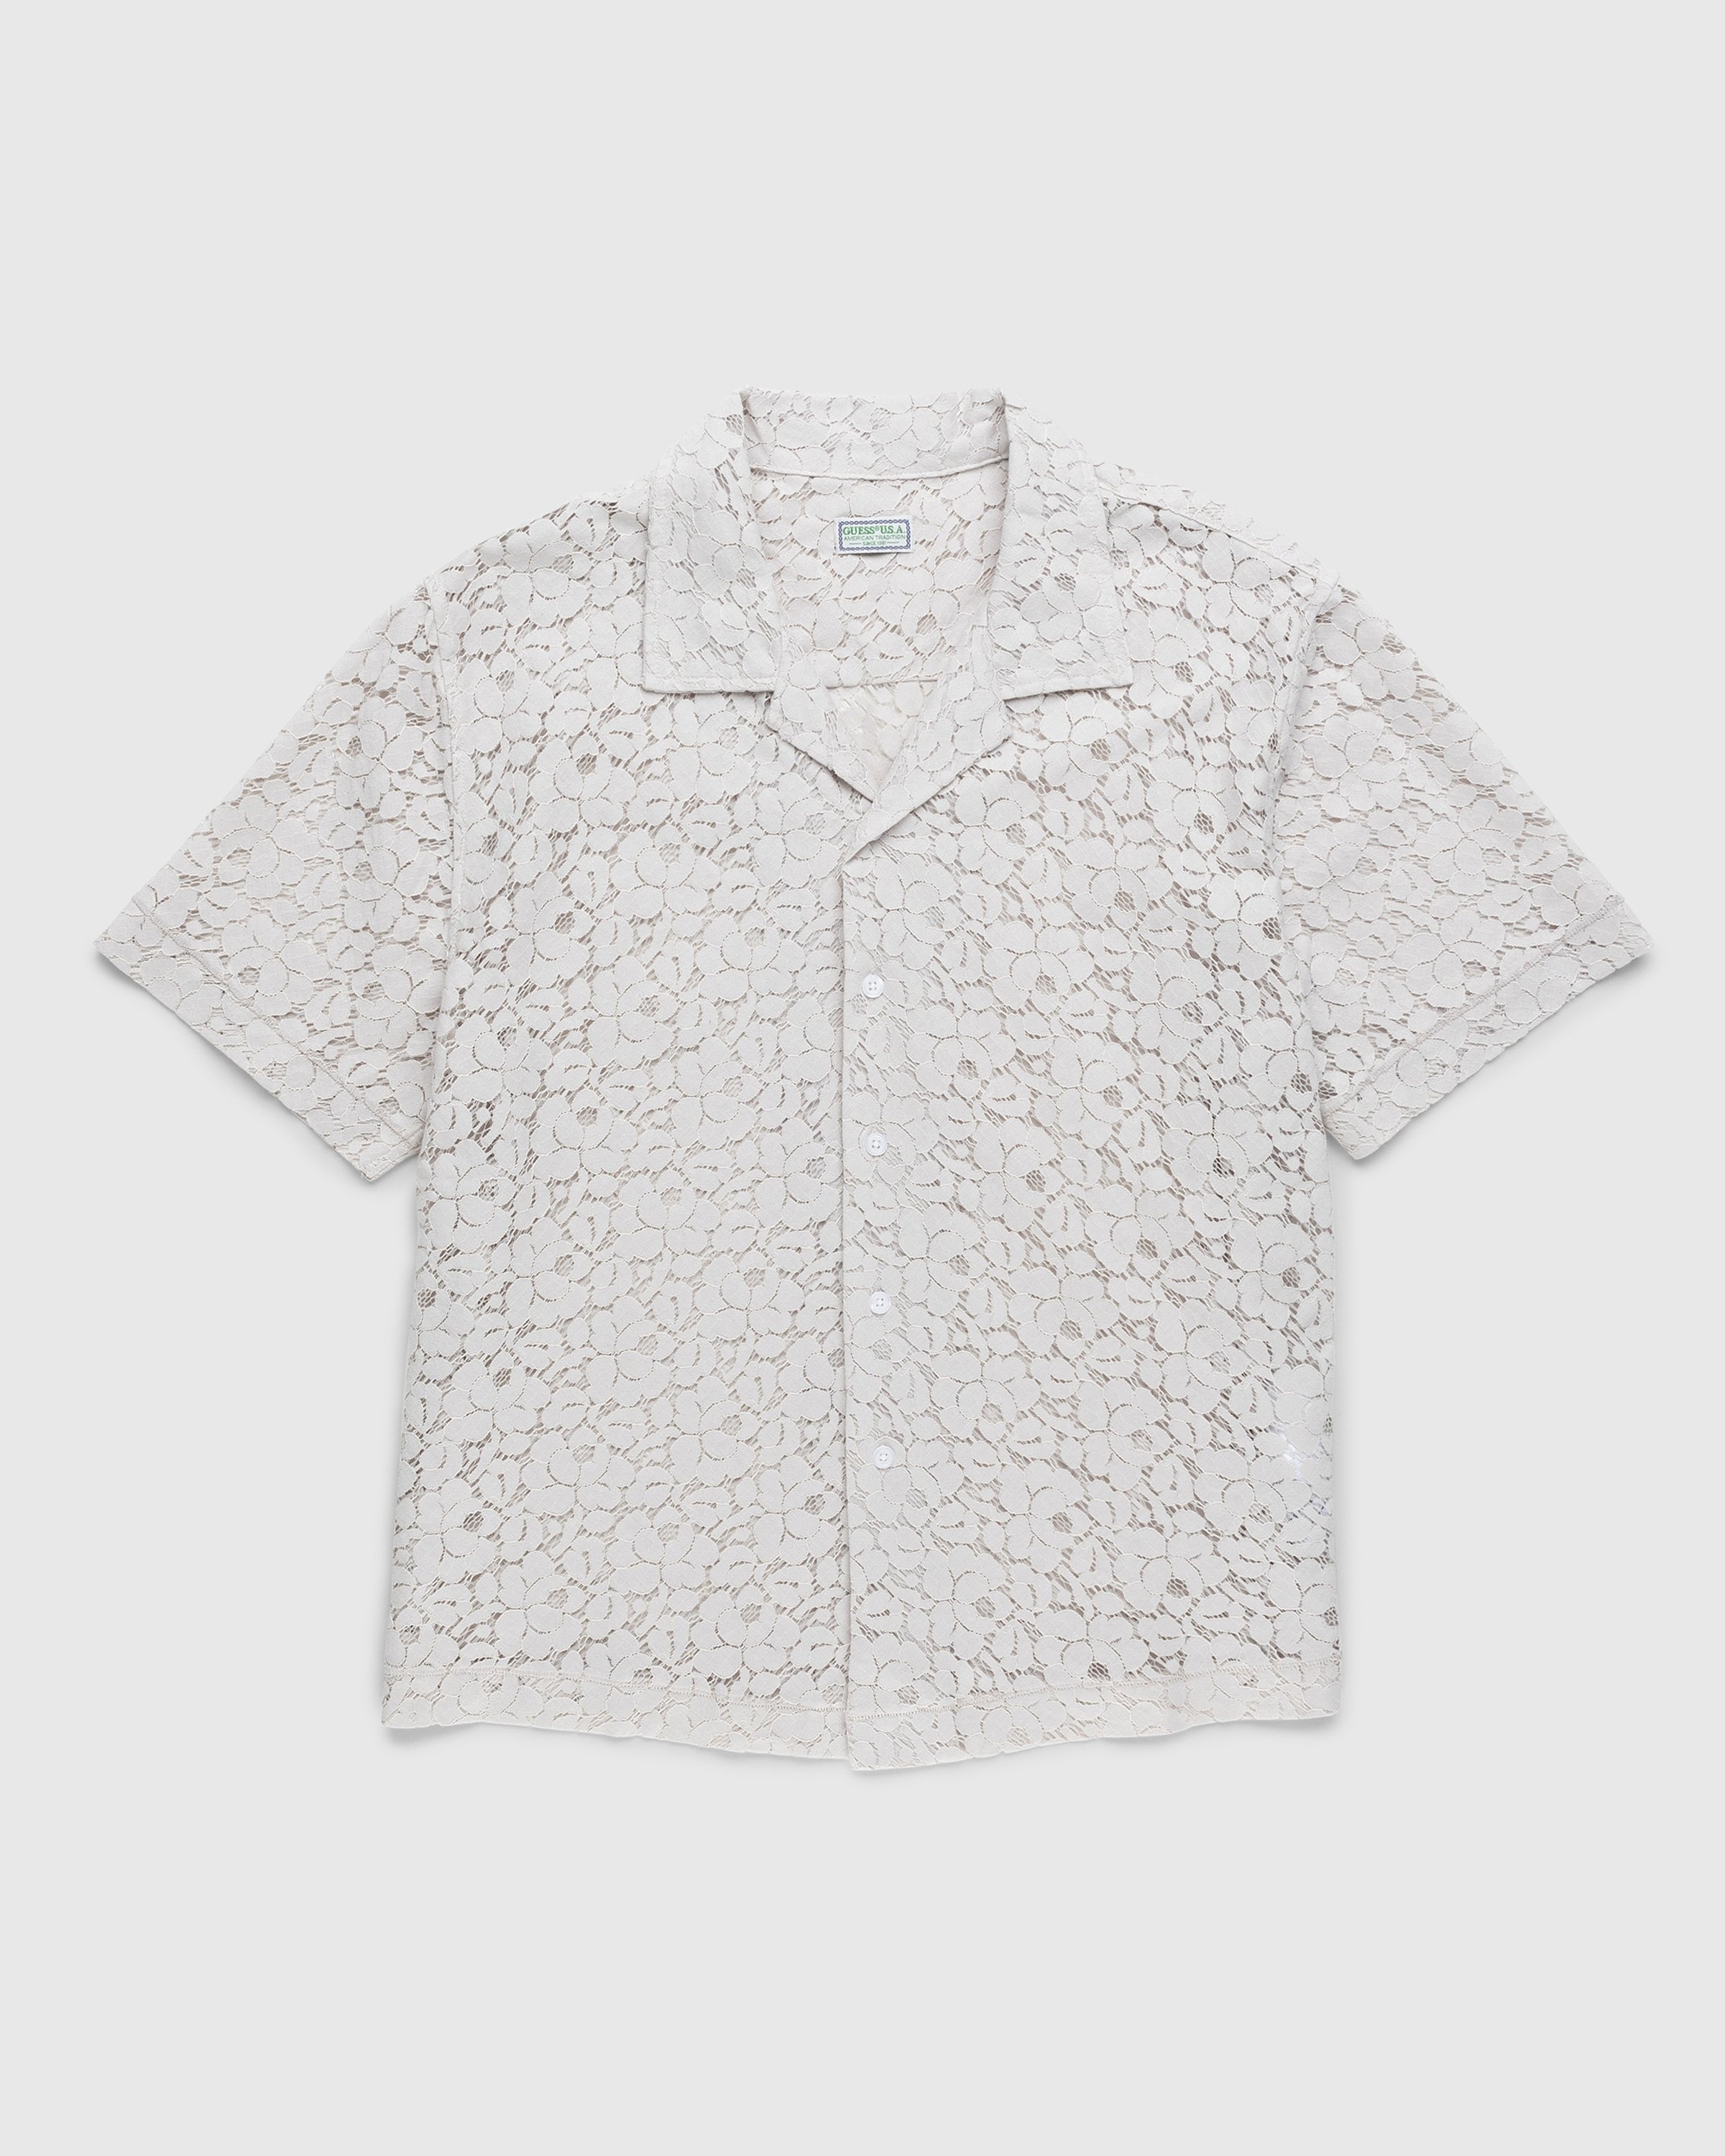 Guess USA – Lace Camp Off Highsnobiety | White Shirt Shop